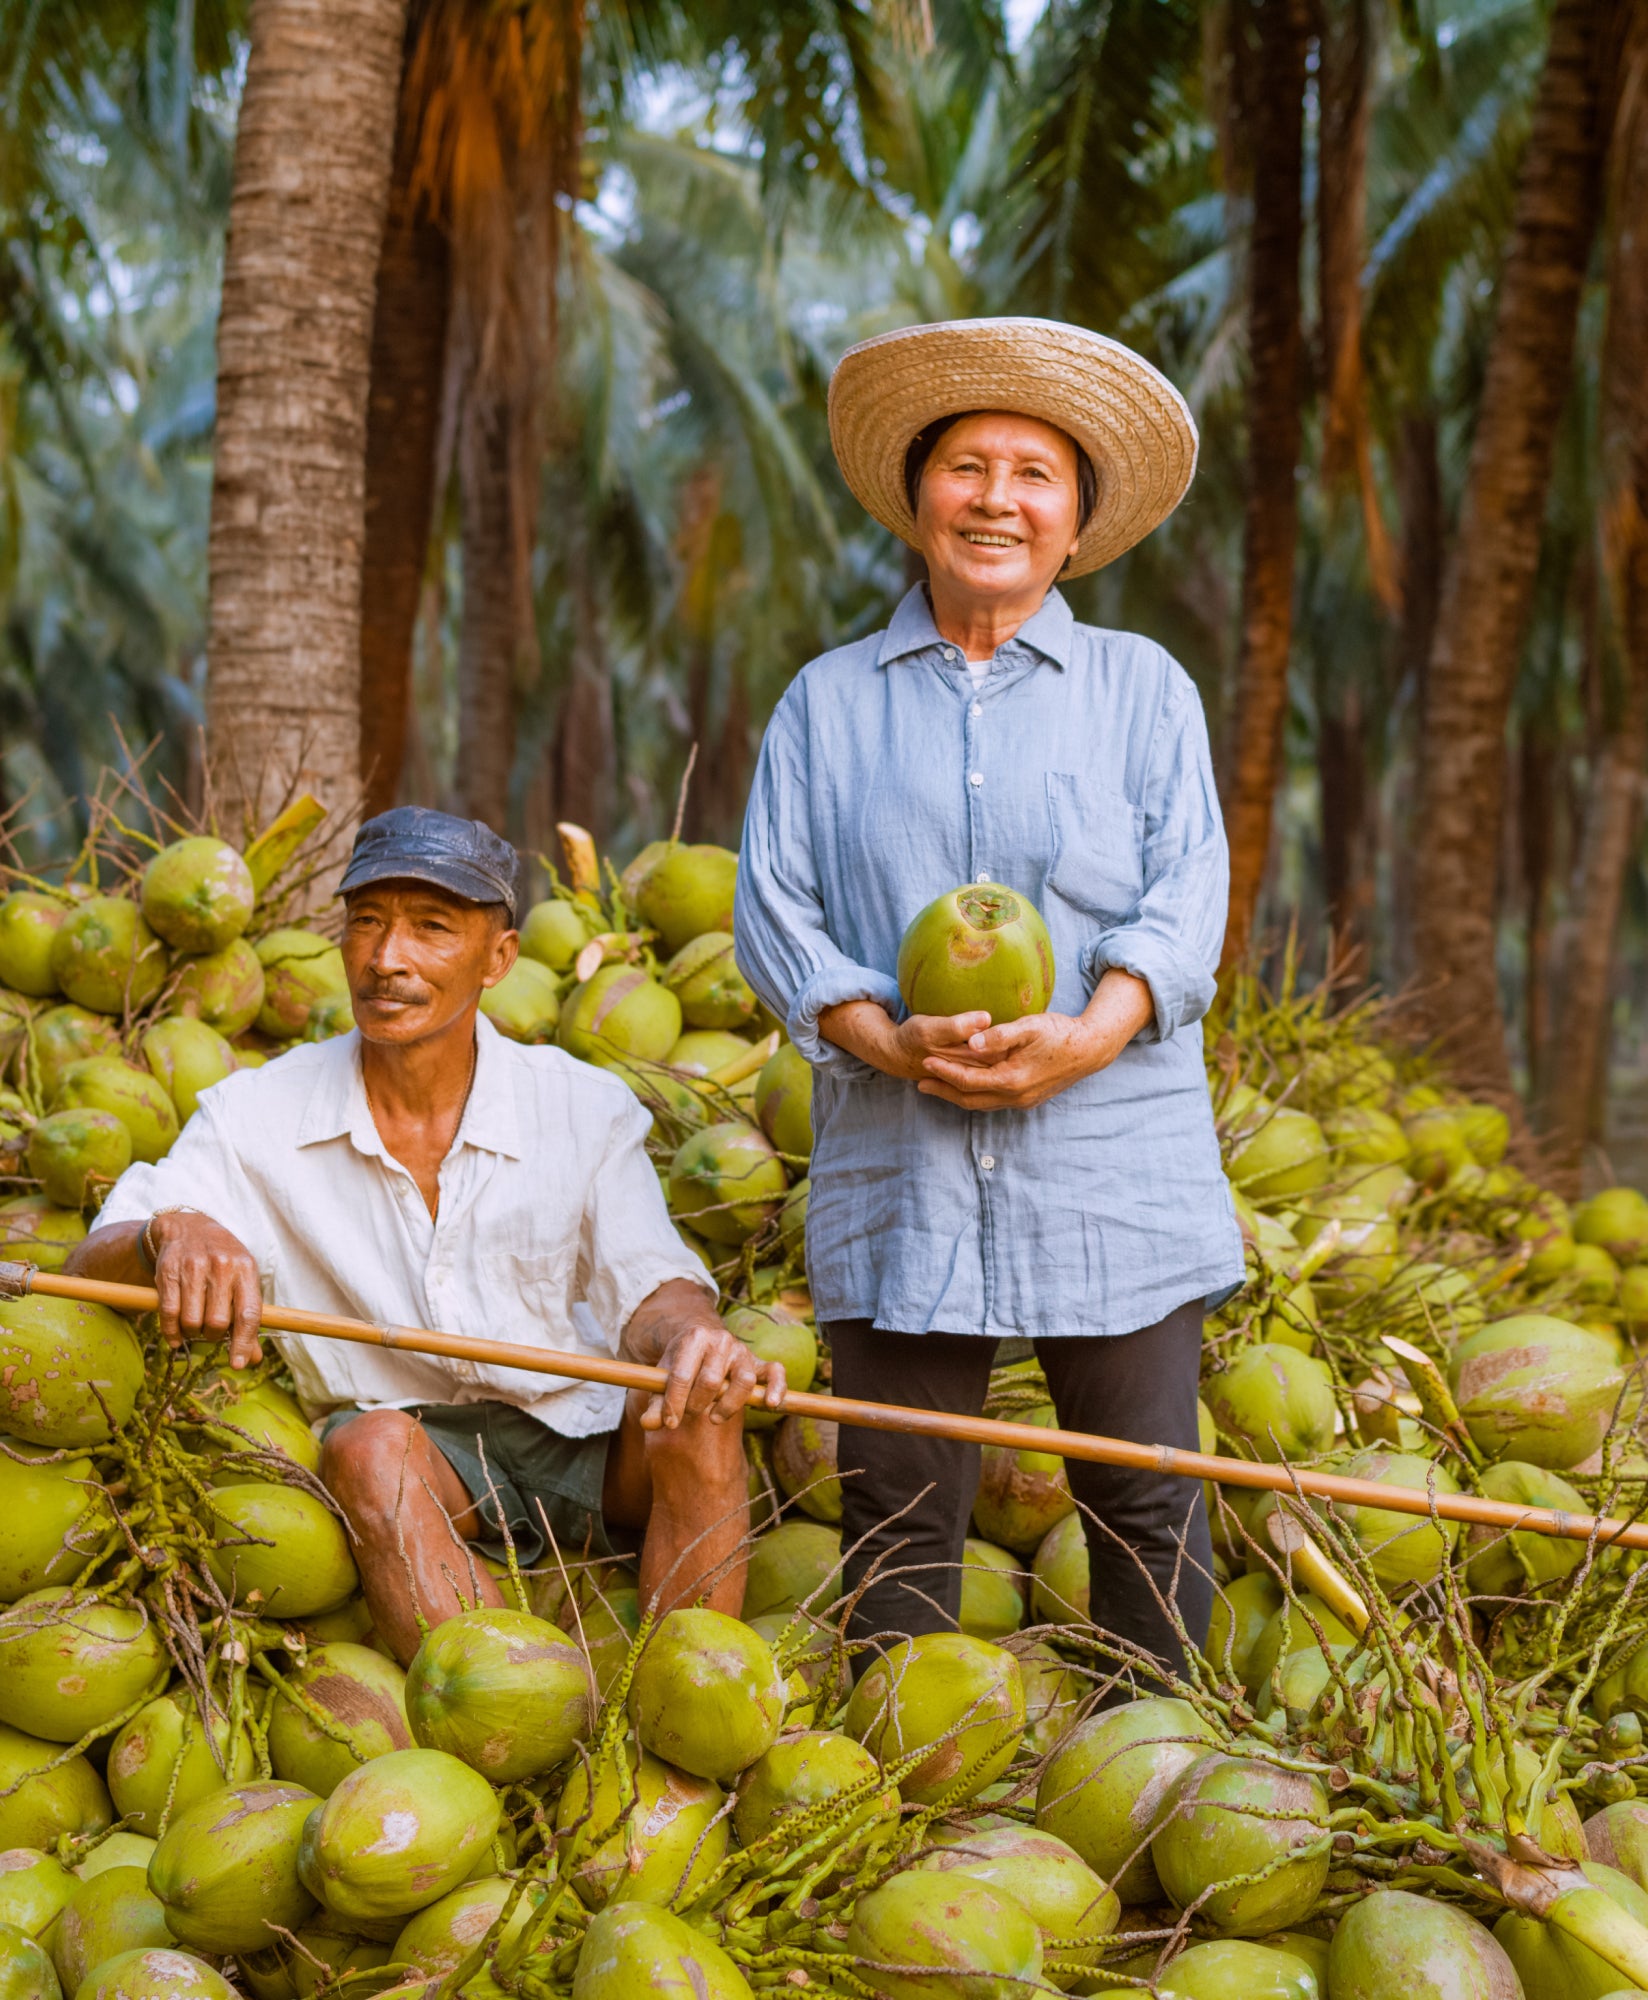 Coconut farmers in Thailand sitting amongst freshly harvested coconuts.